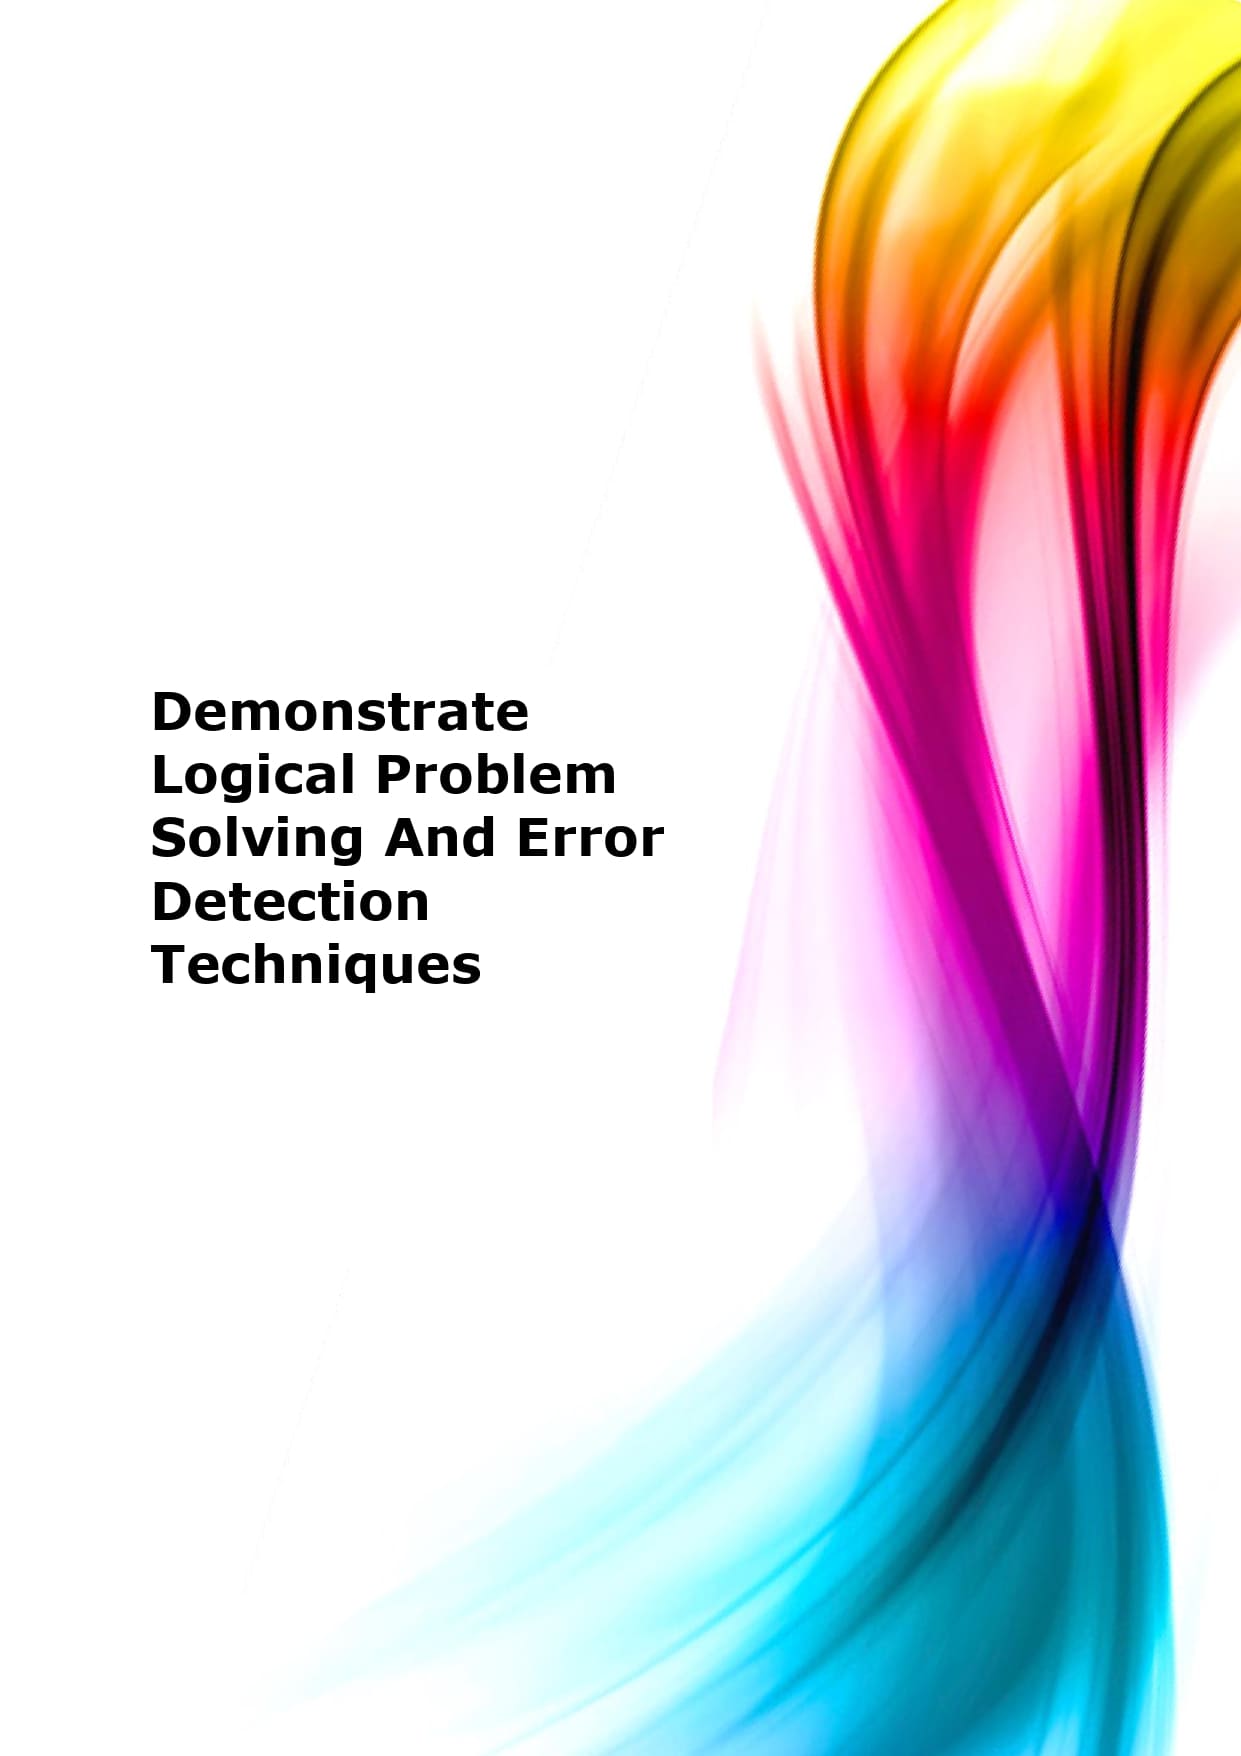 demonstrate logical problem solving and error detection techniques